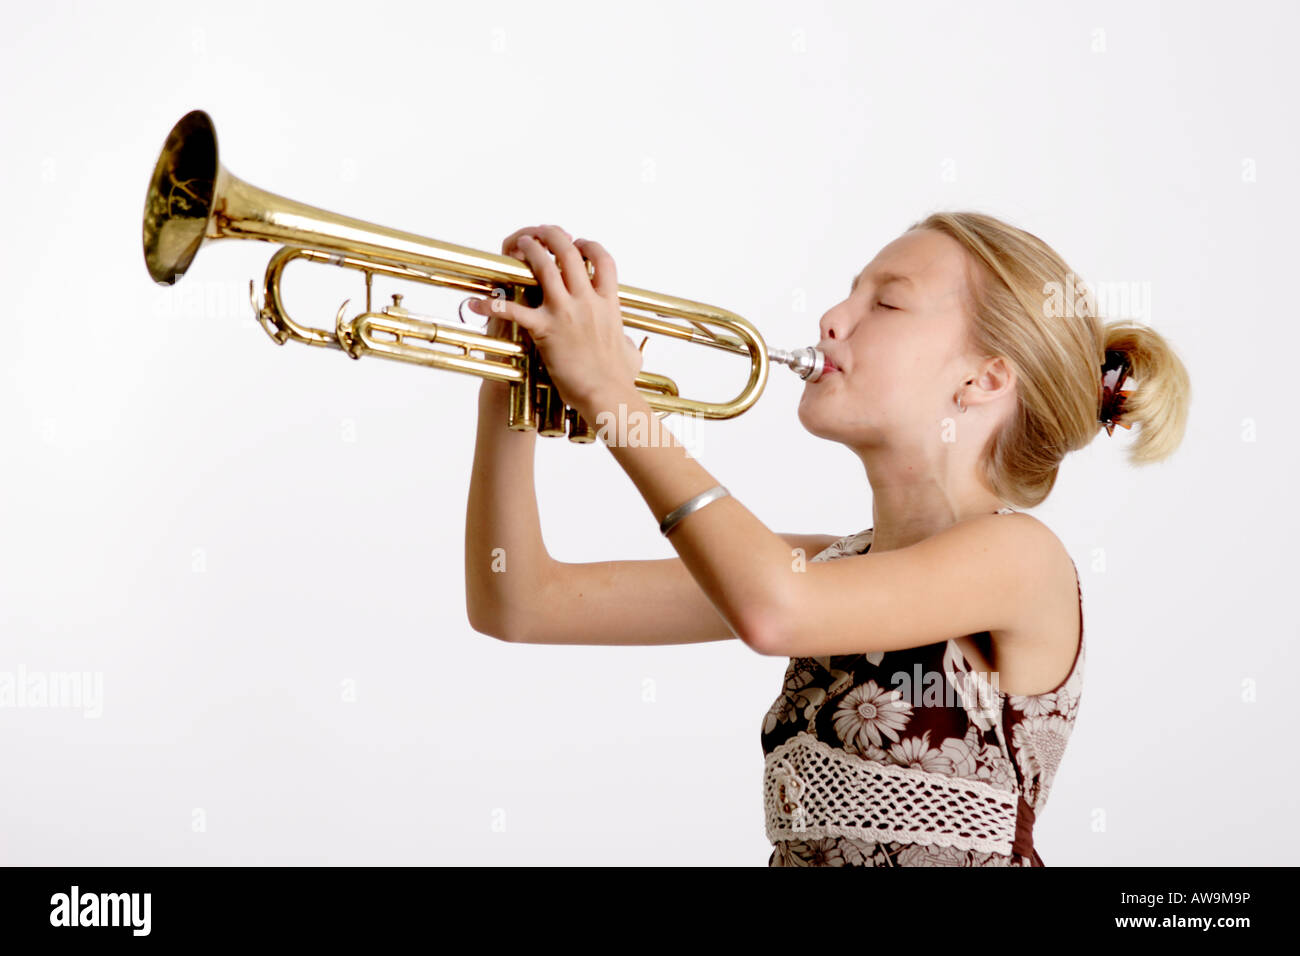 Stock Photograph of a young girl playing the trumpet Stock Photo - Alamy